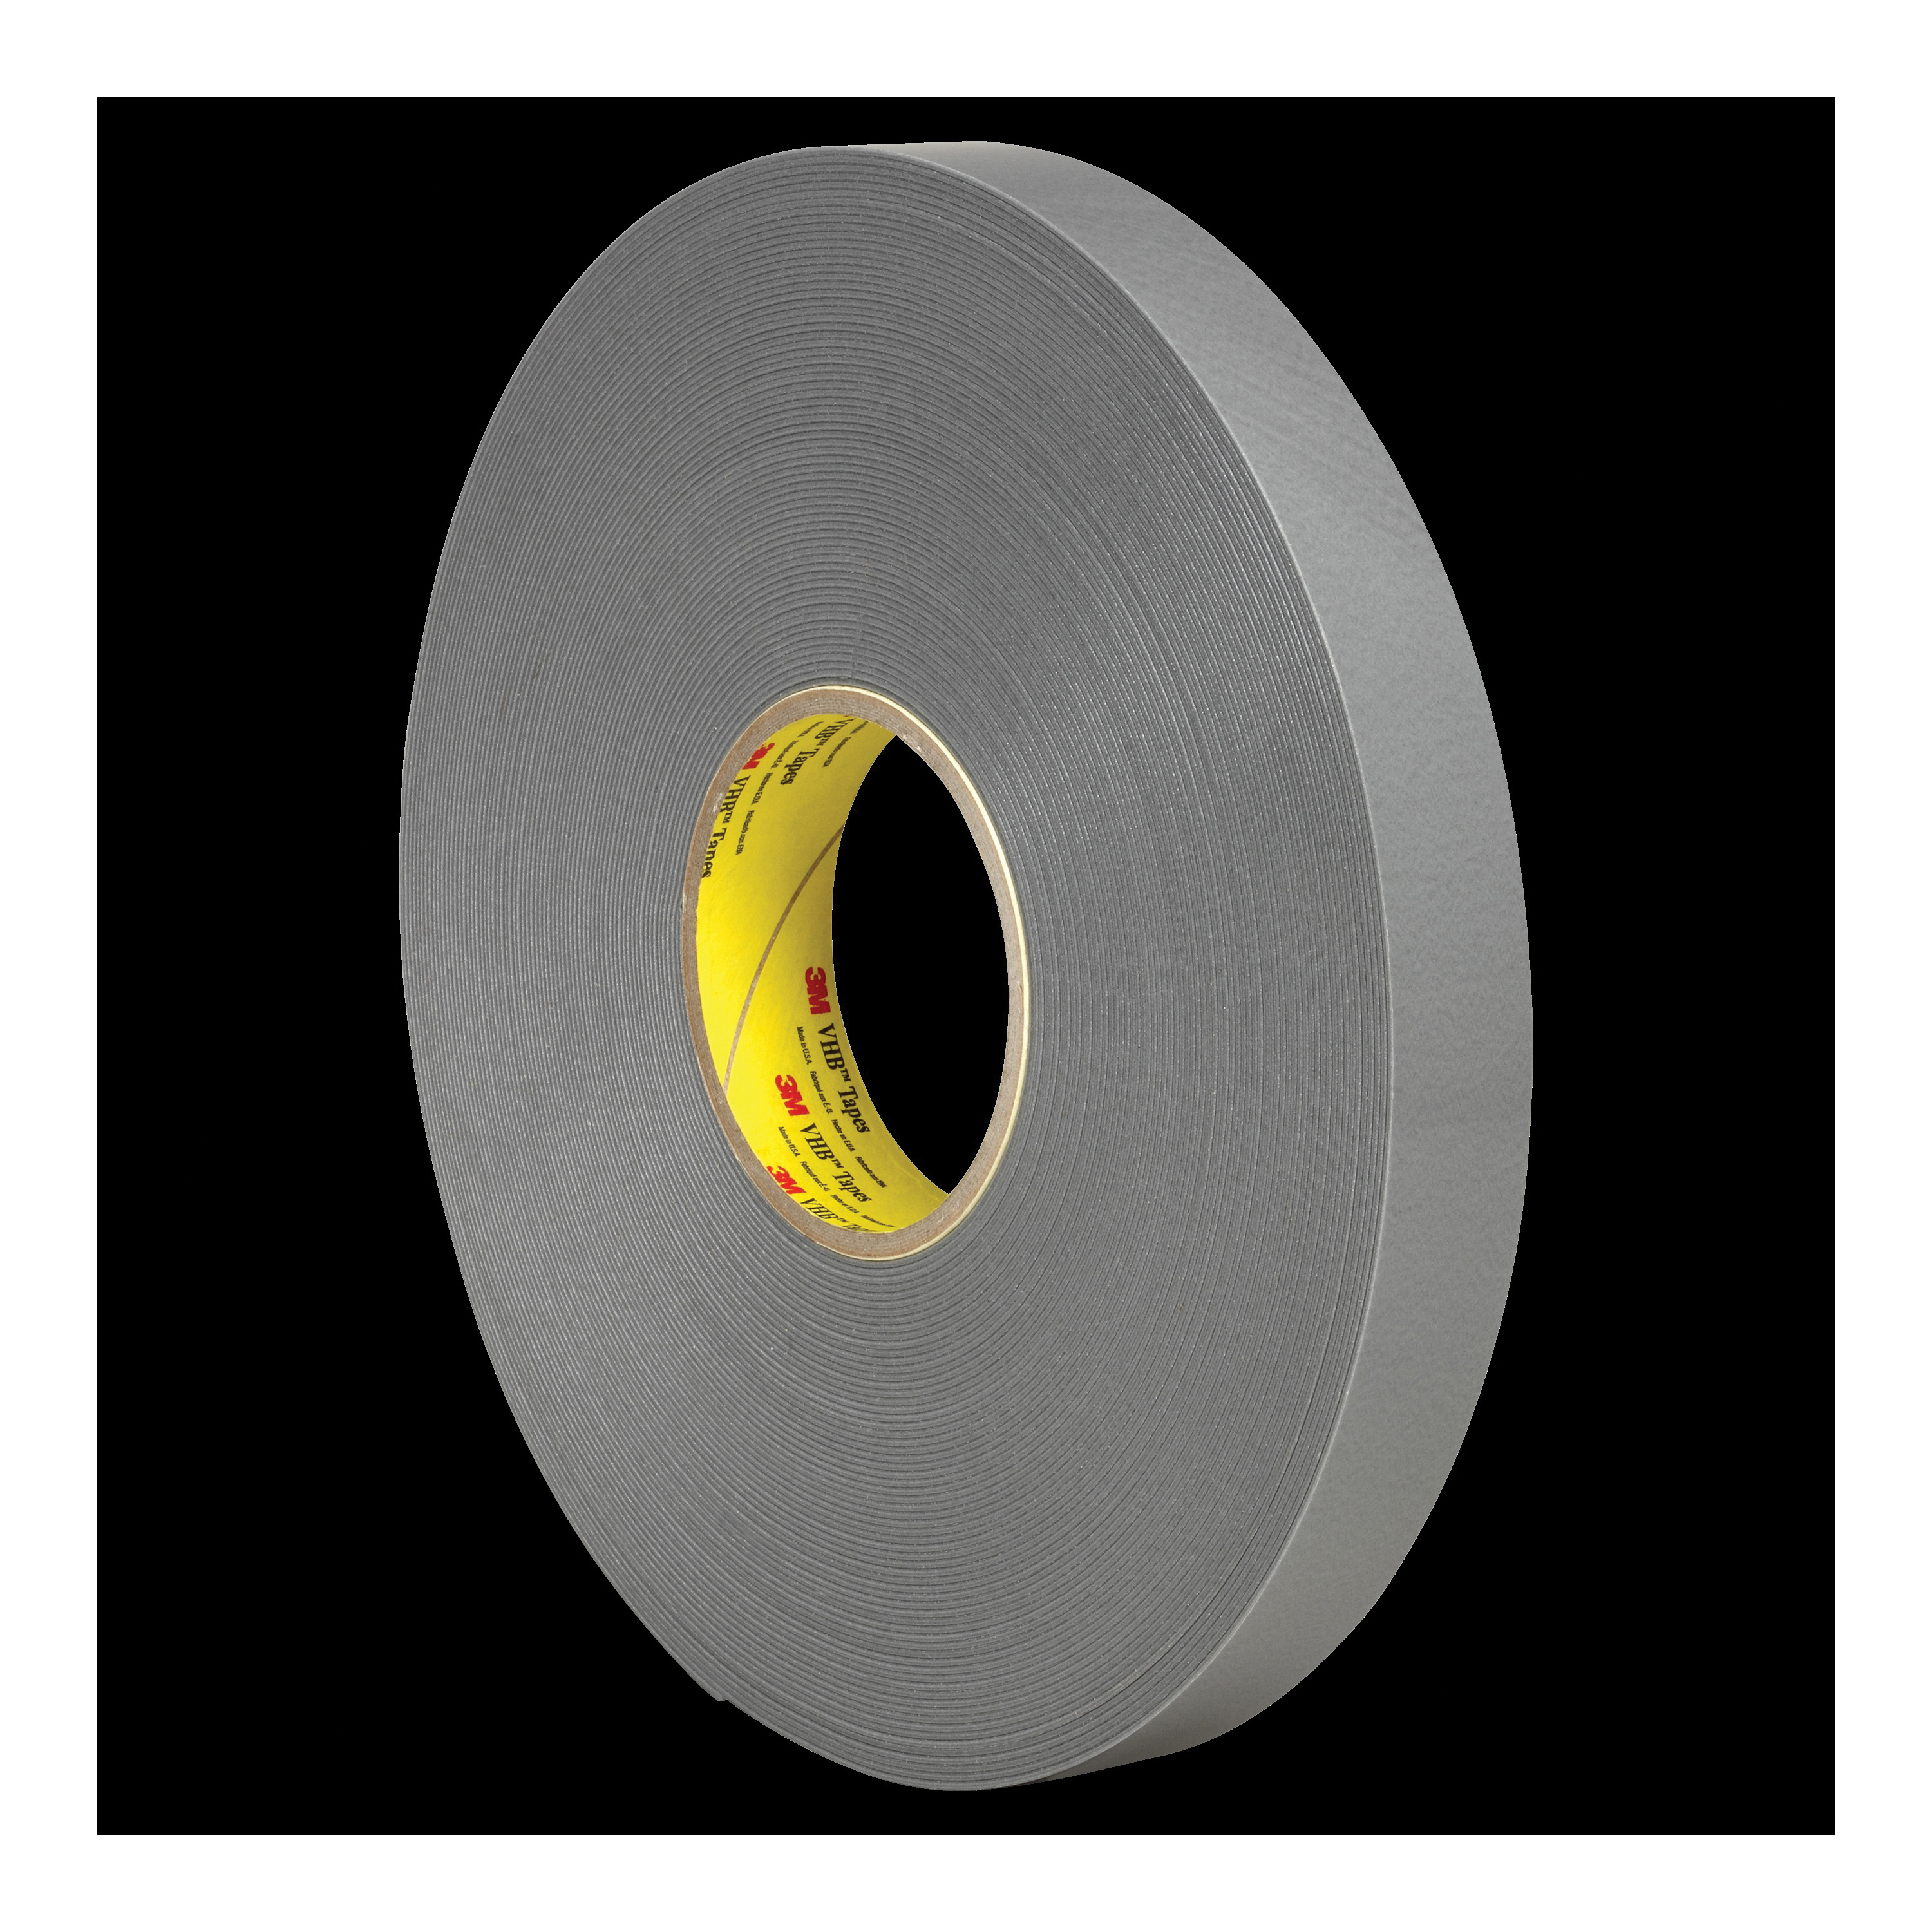 3M™ VHB™ 021200-30565 Pressure Sensitive Double Sided Bonding Tape, 36 yd L x 1 in W, 0.045 in THK, Low Temperature Acrylic Adhesive, Acrylic Foam Backing, Gray